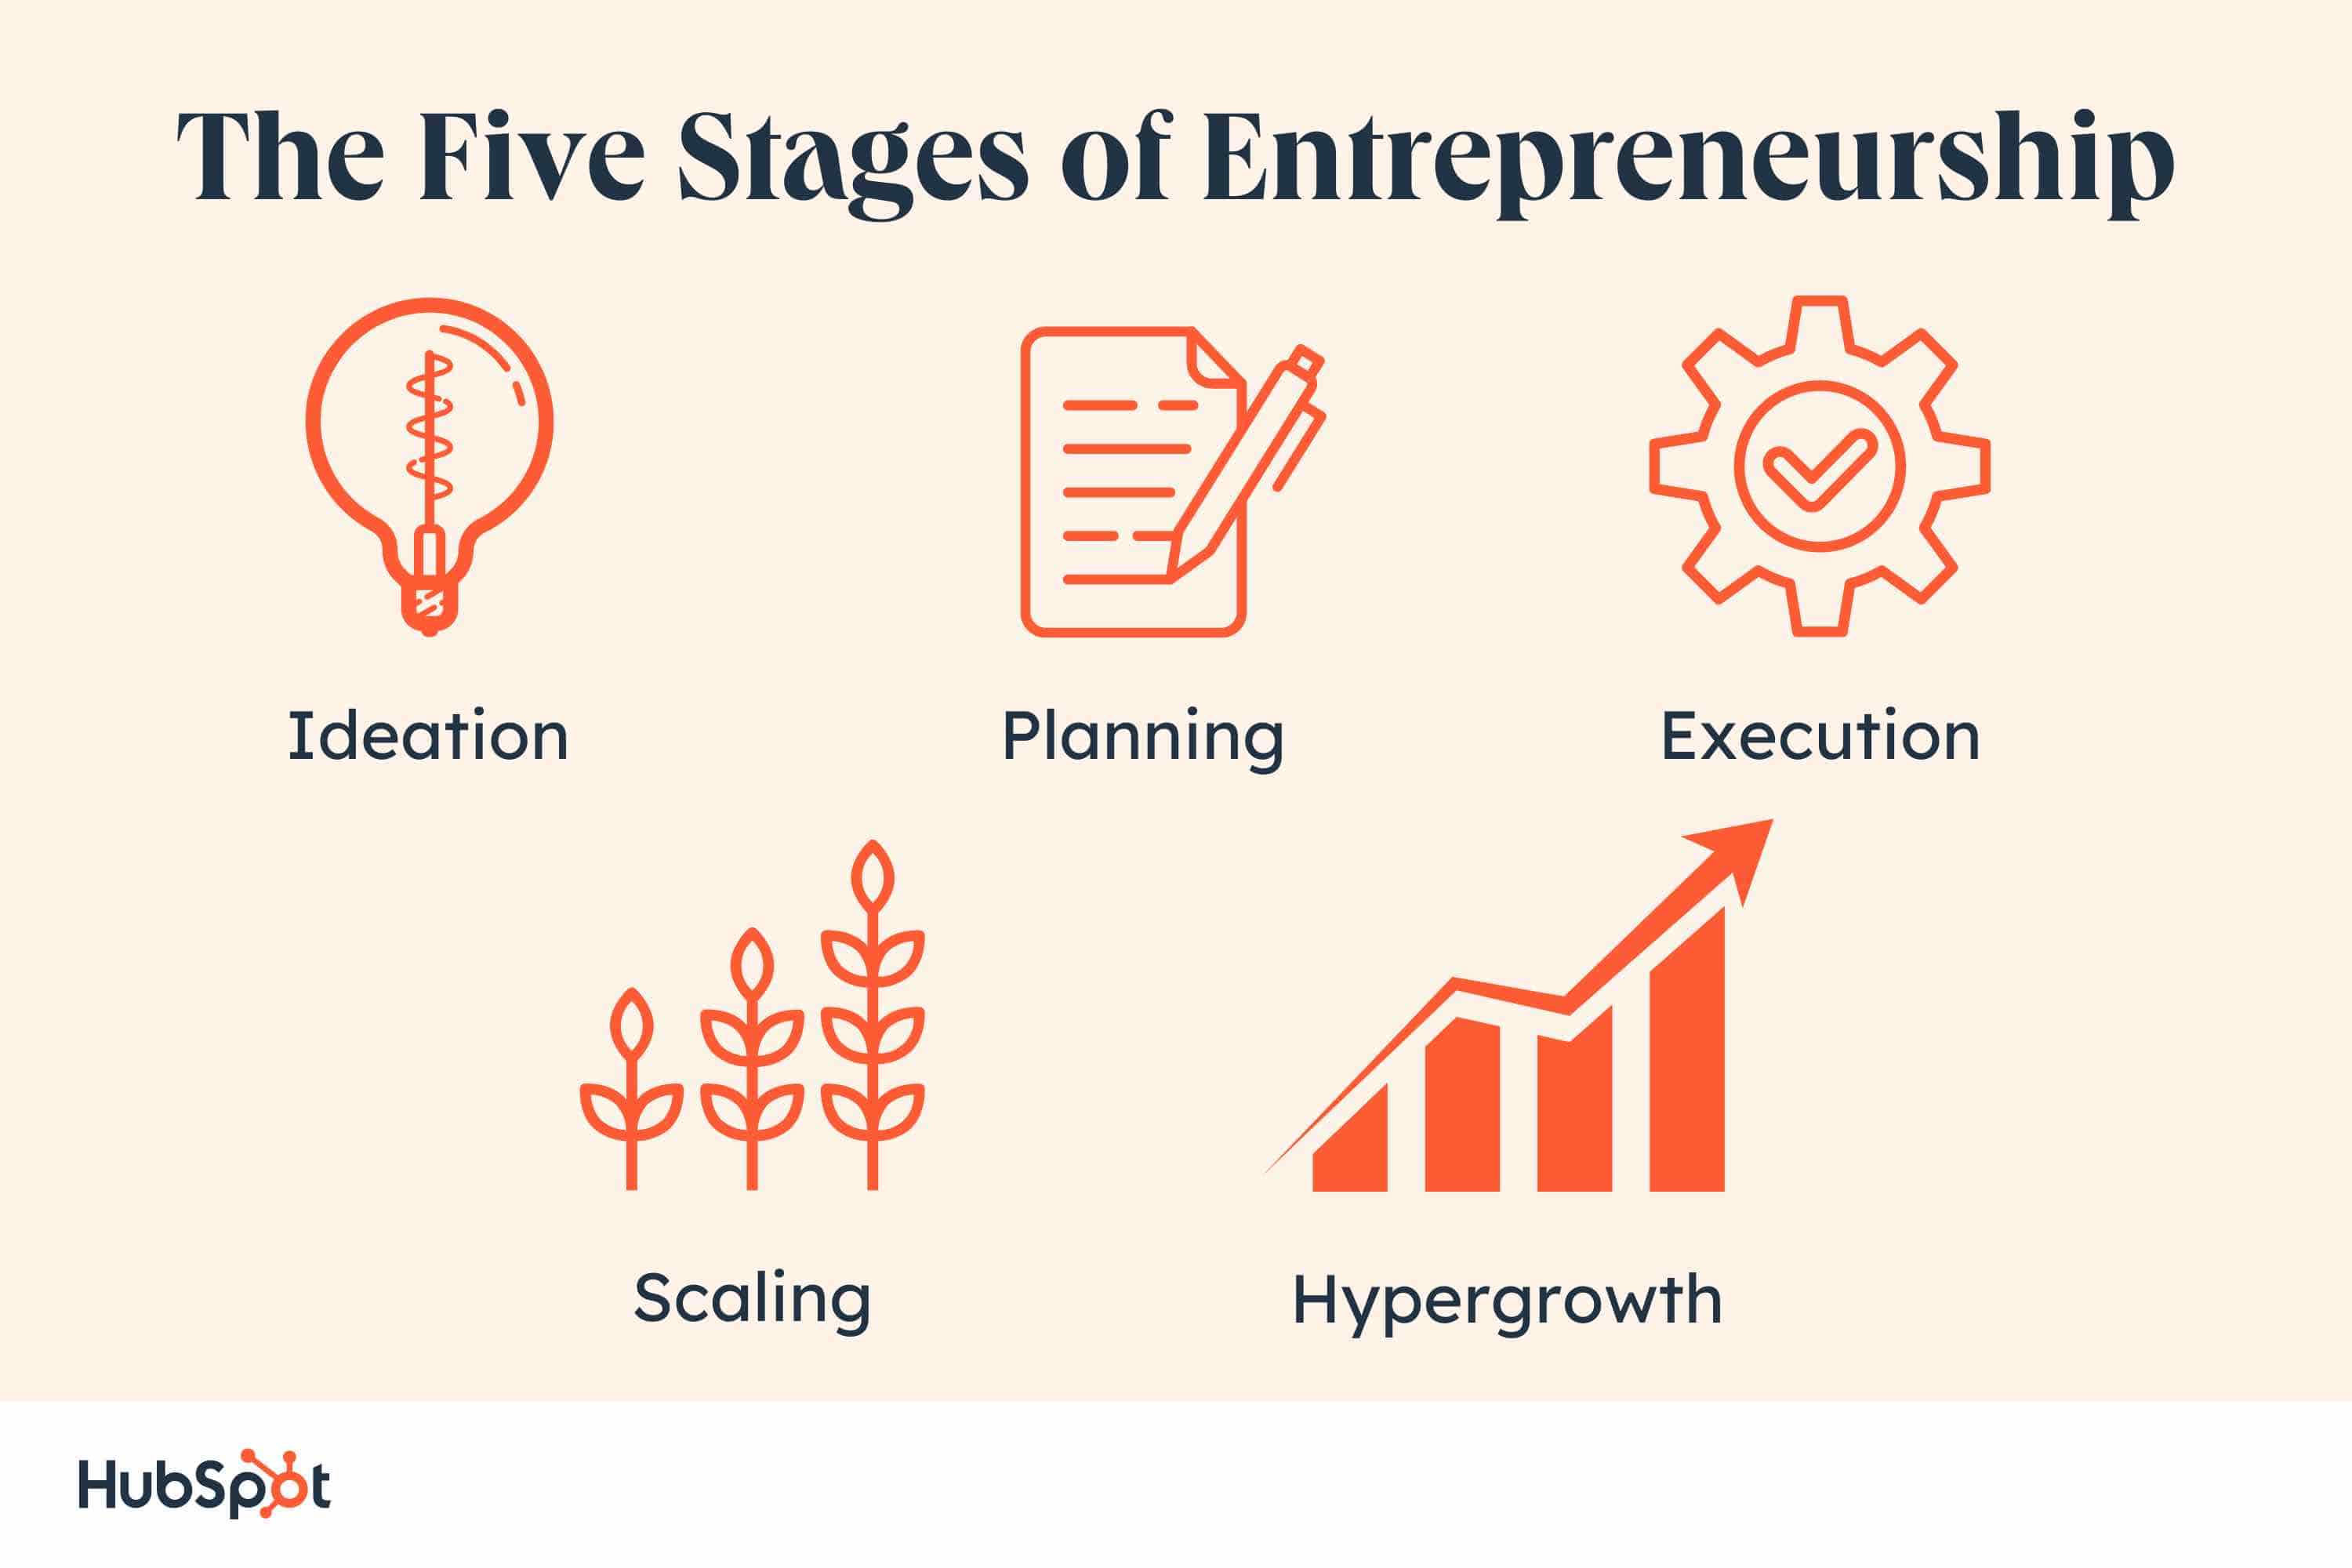 Five stages of entrepreneurship: ideation, planning, execution, scaling, hypergrowth